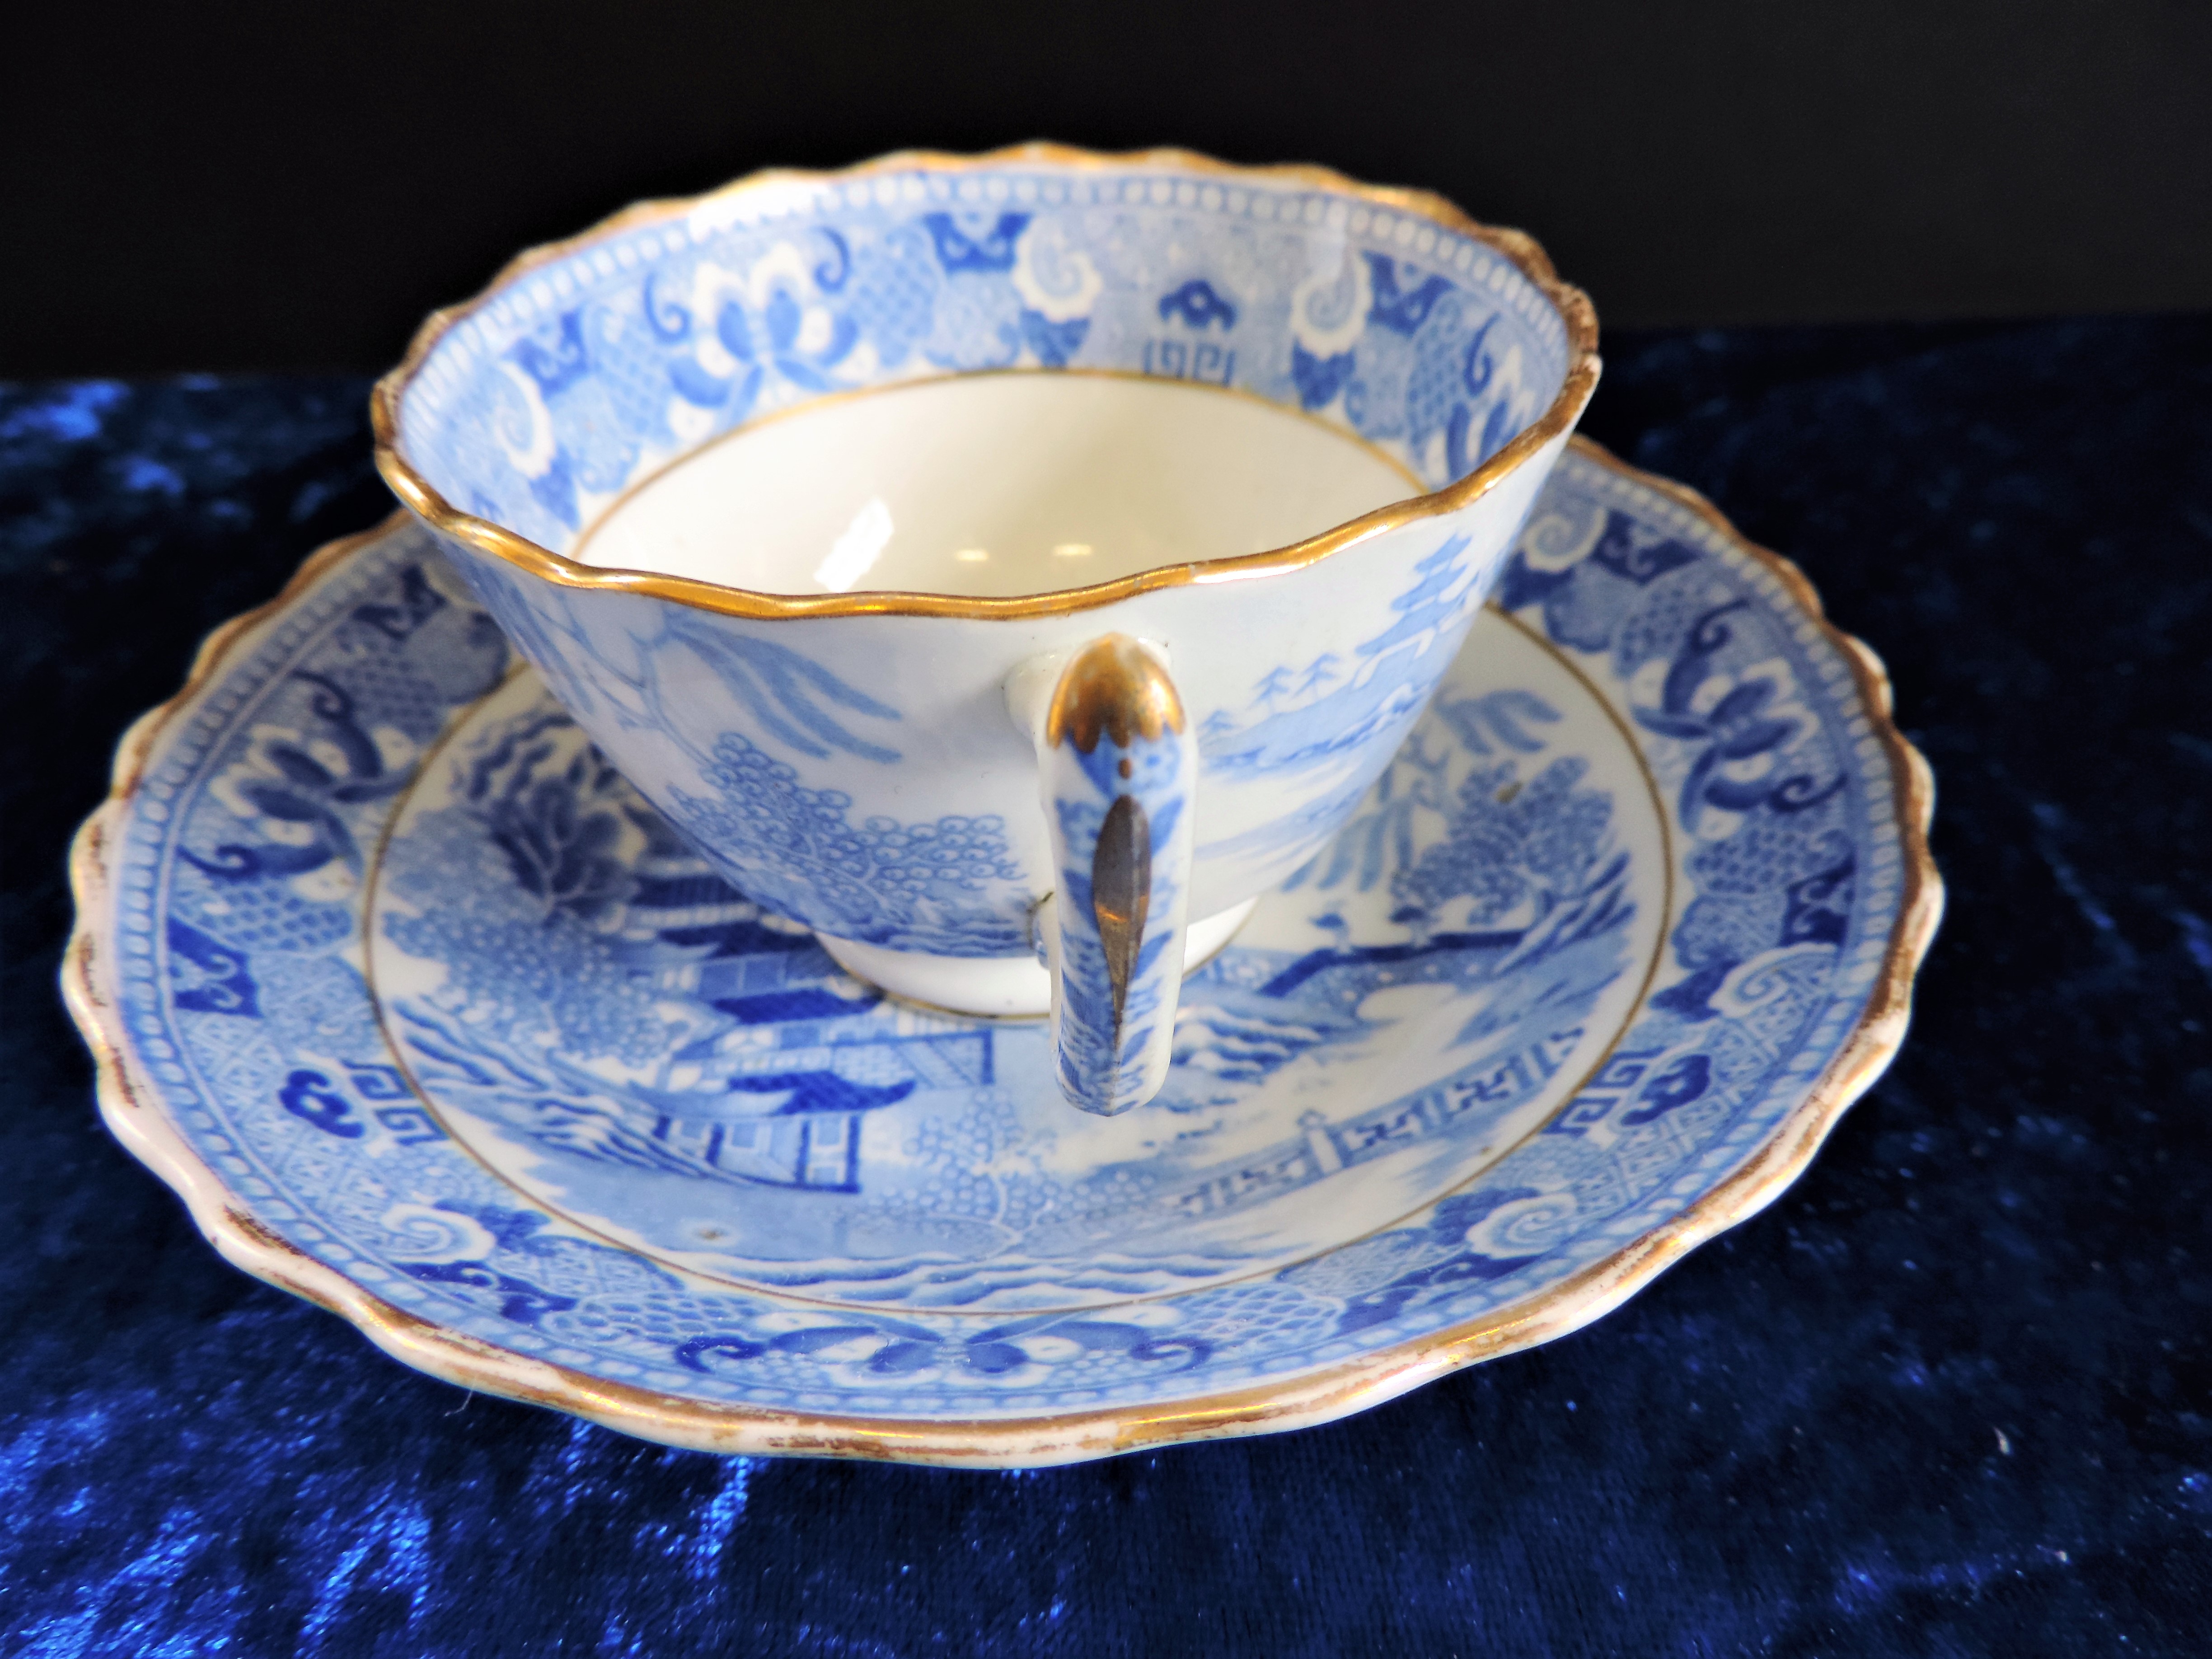 Antique Blue & White Chinoiserie Tea Cup and Saucer. Circa 1820 Brosley Pattern Tea Cup and Saucer - - Bild 6 aus 6